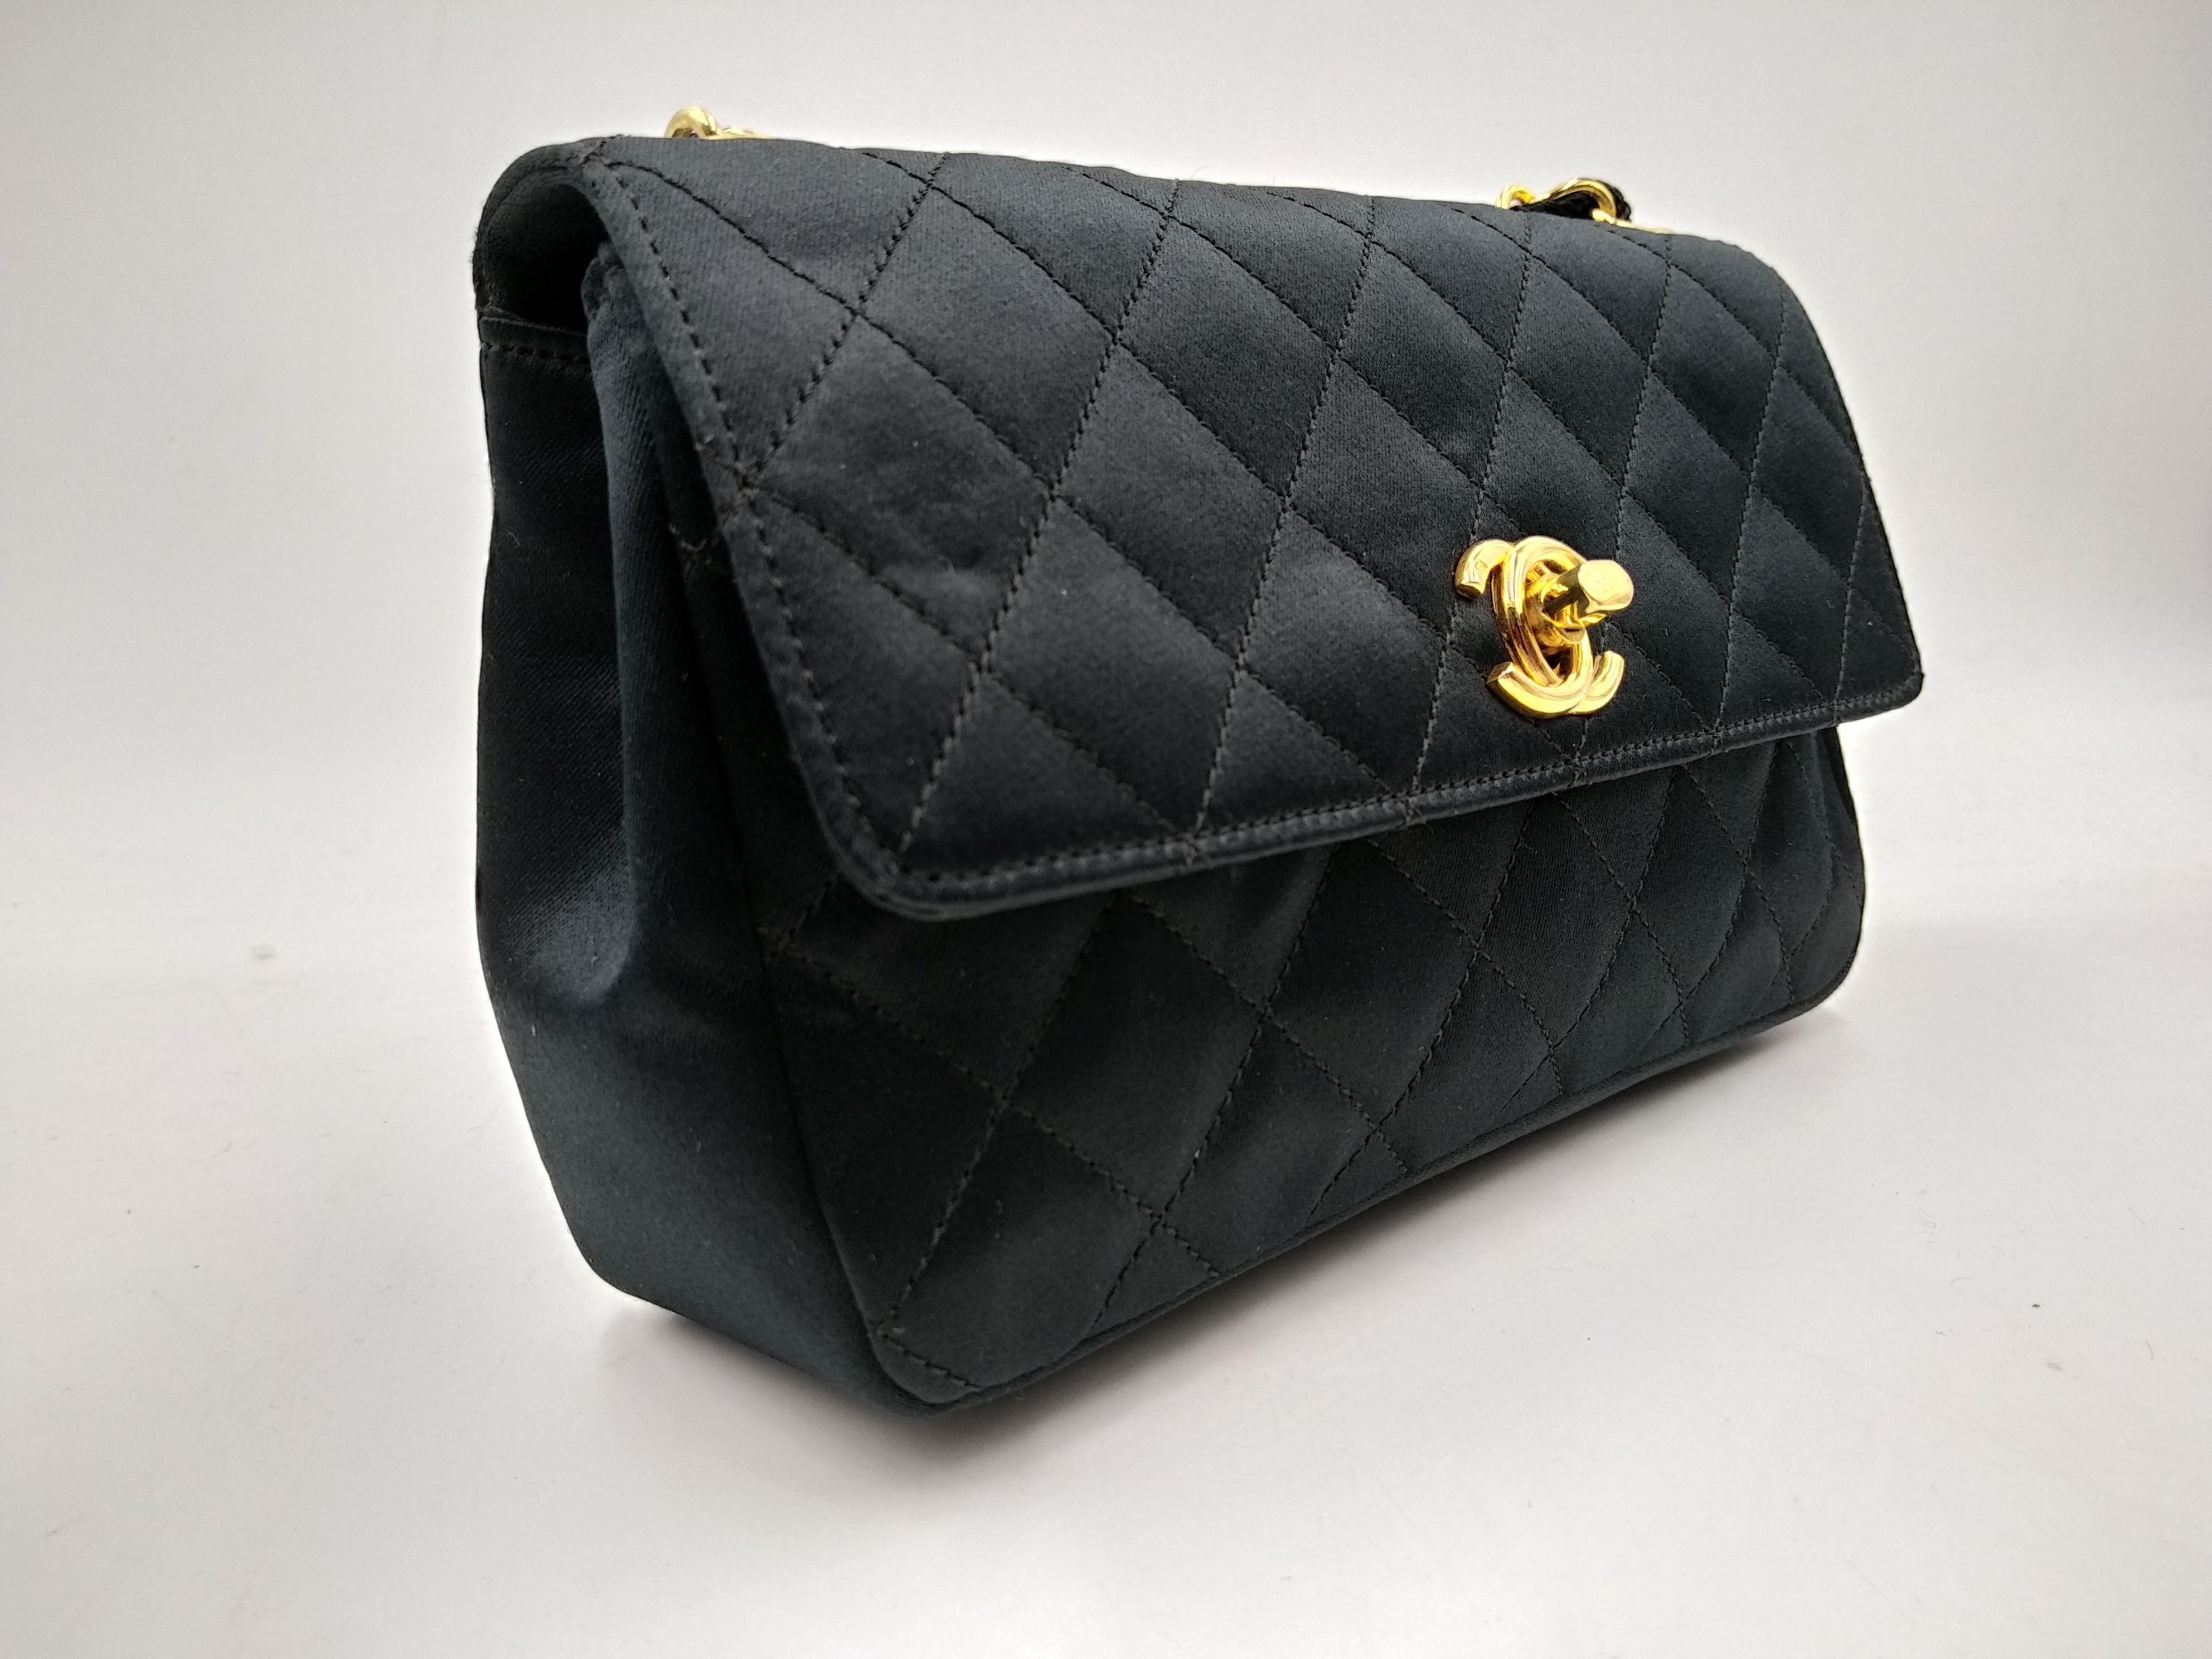 Chanel Black Quilted Satin Mini Flap Bag with Gold Hardware For Sale 1